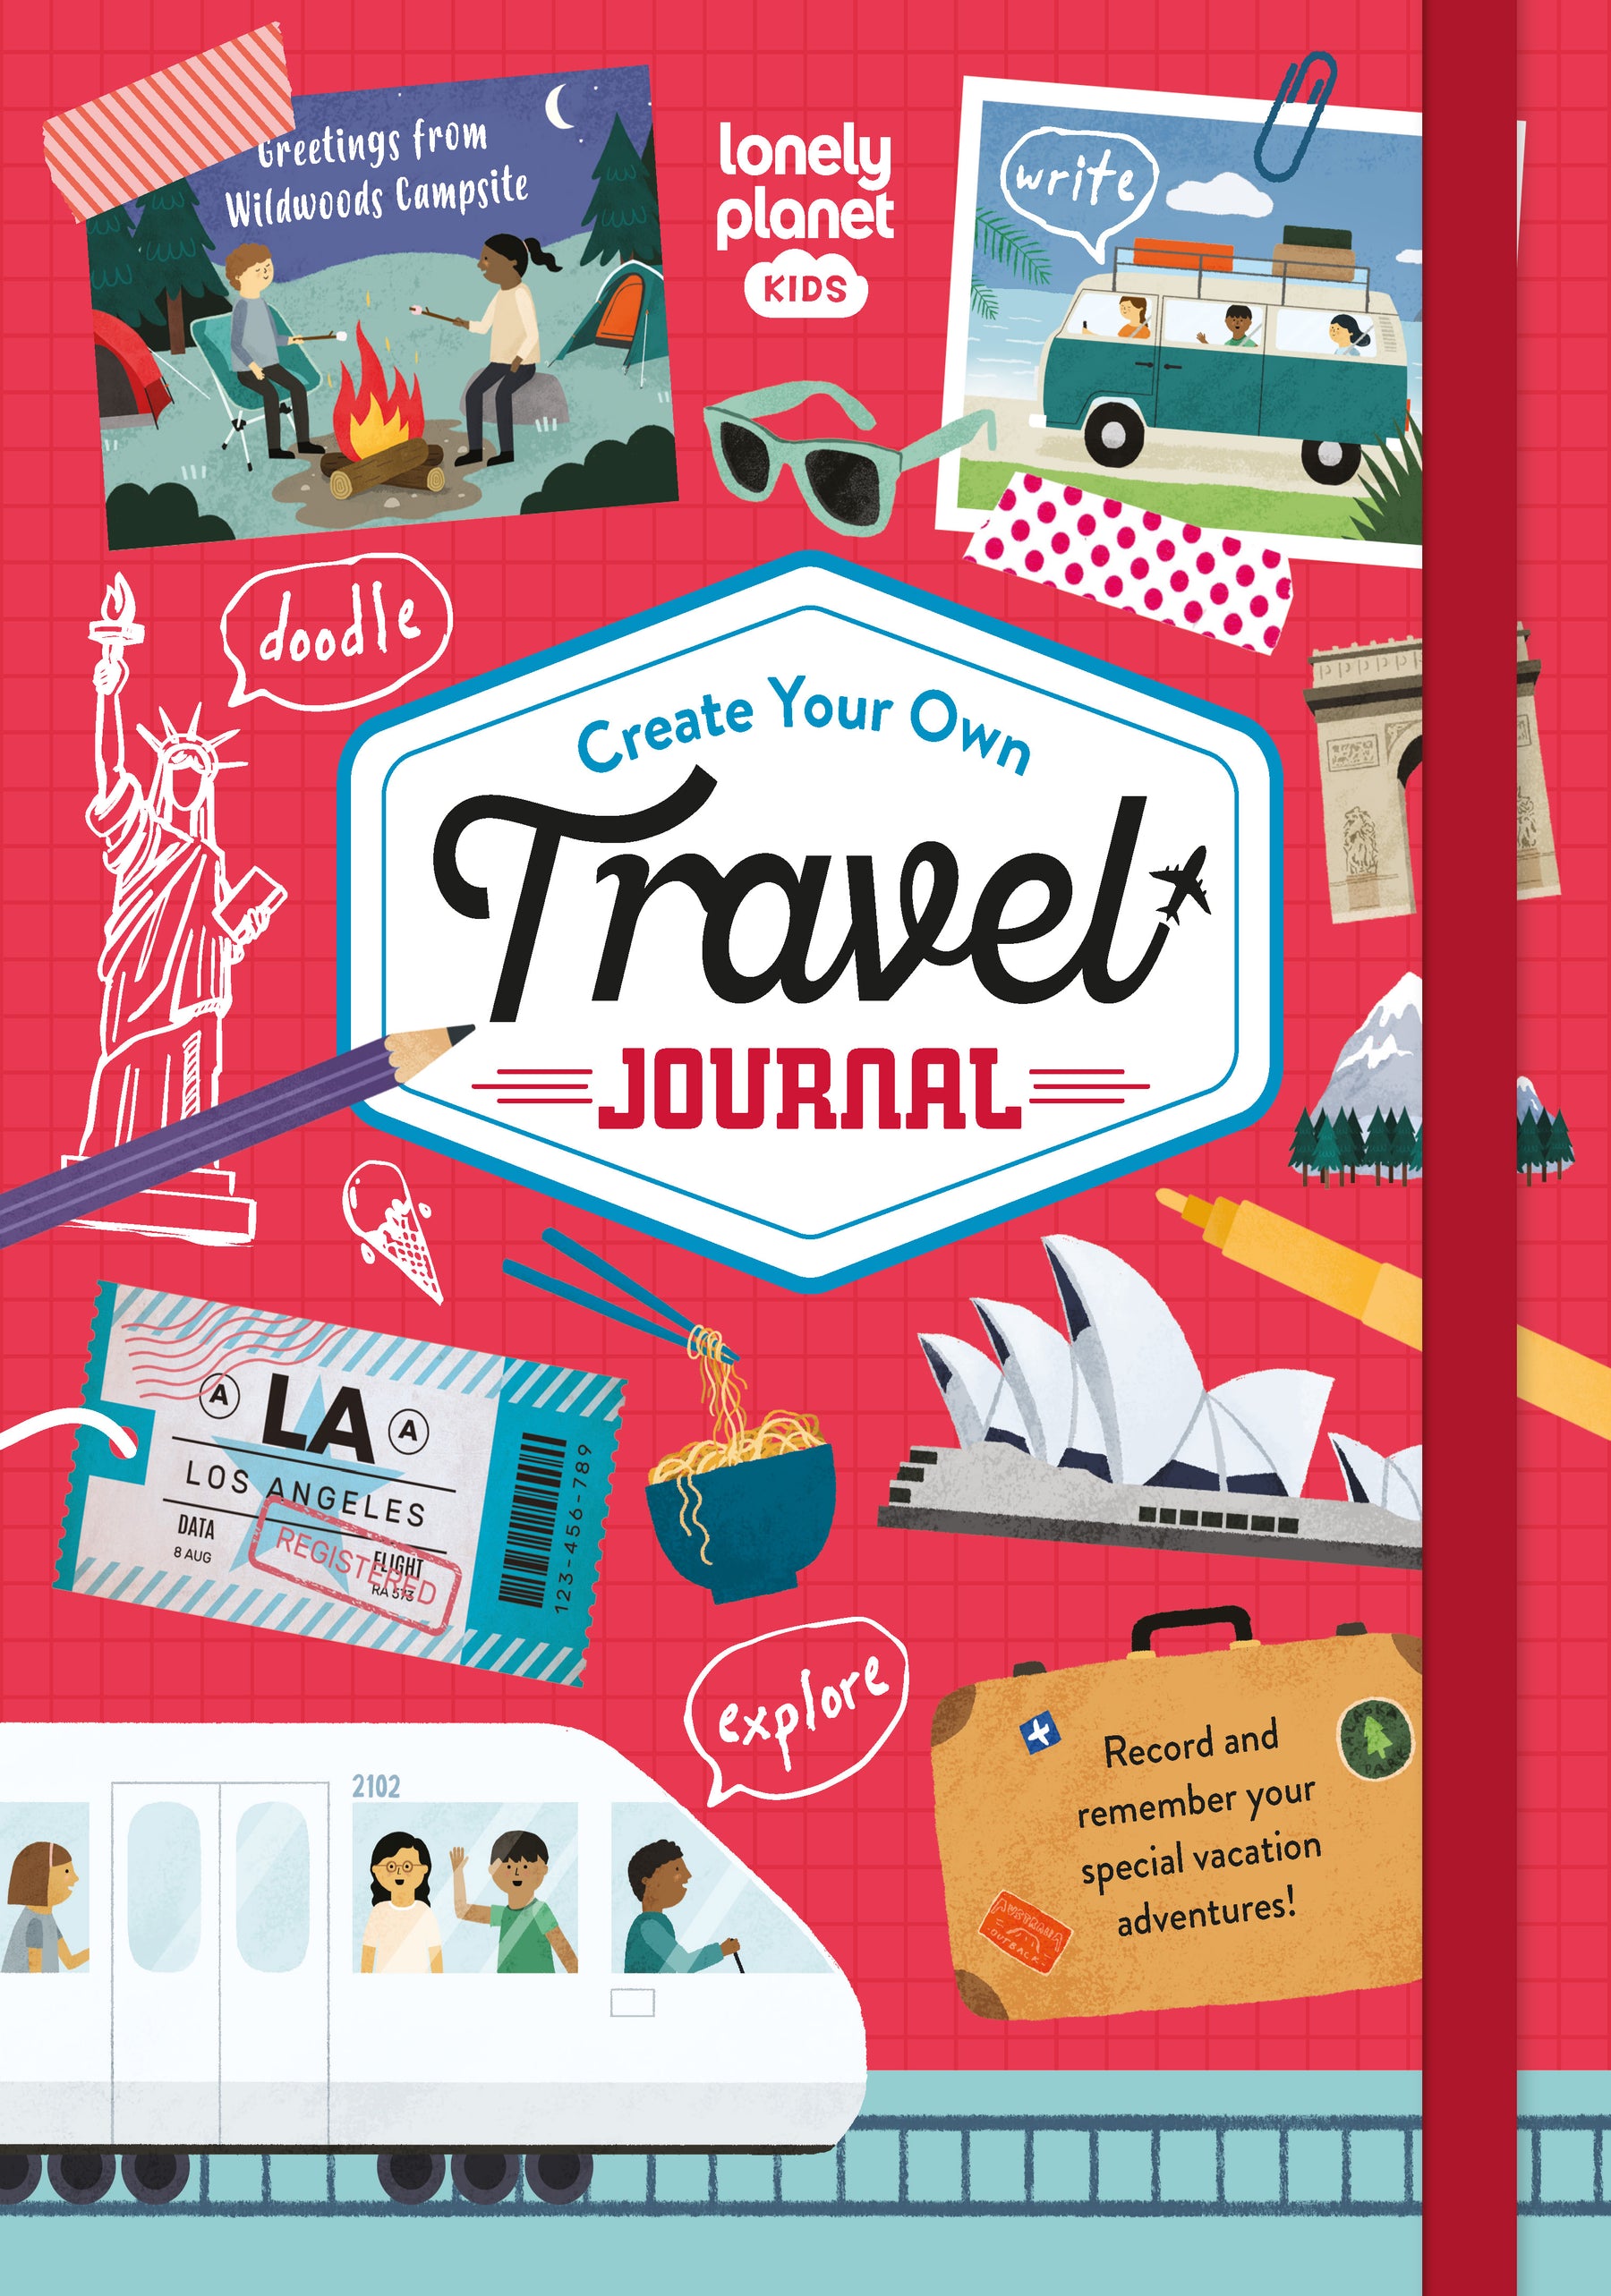 Create Your Own Travel Journal (North and South America edition)